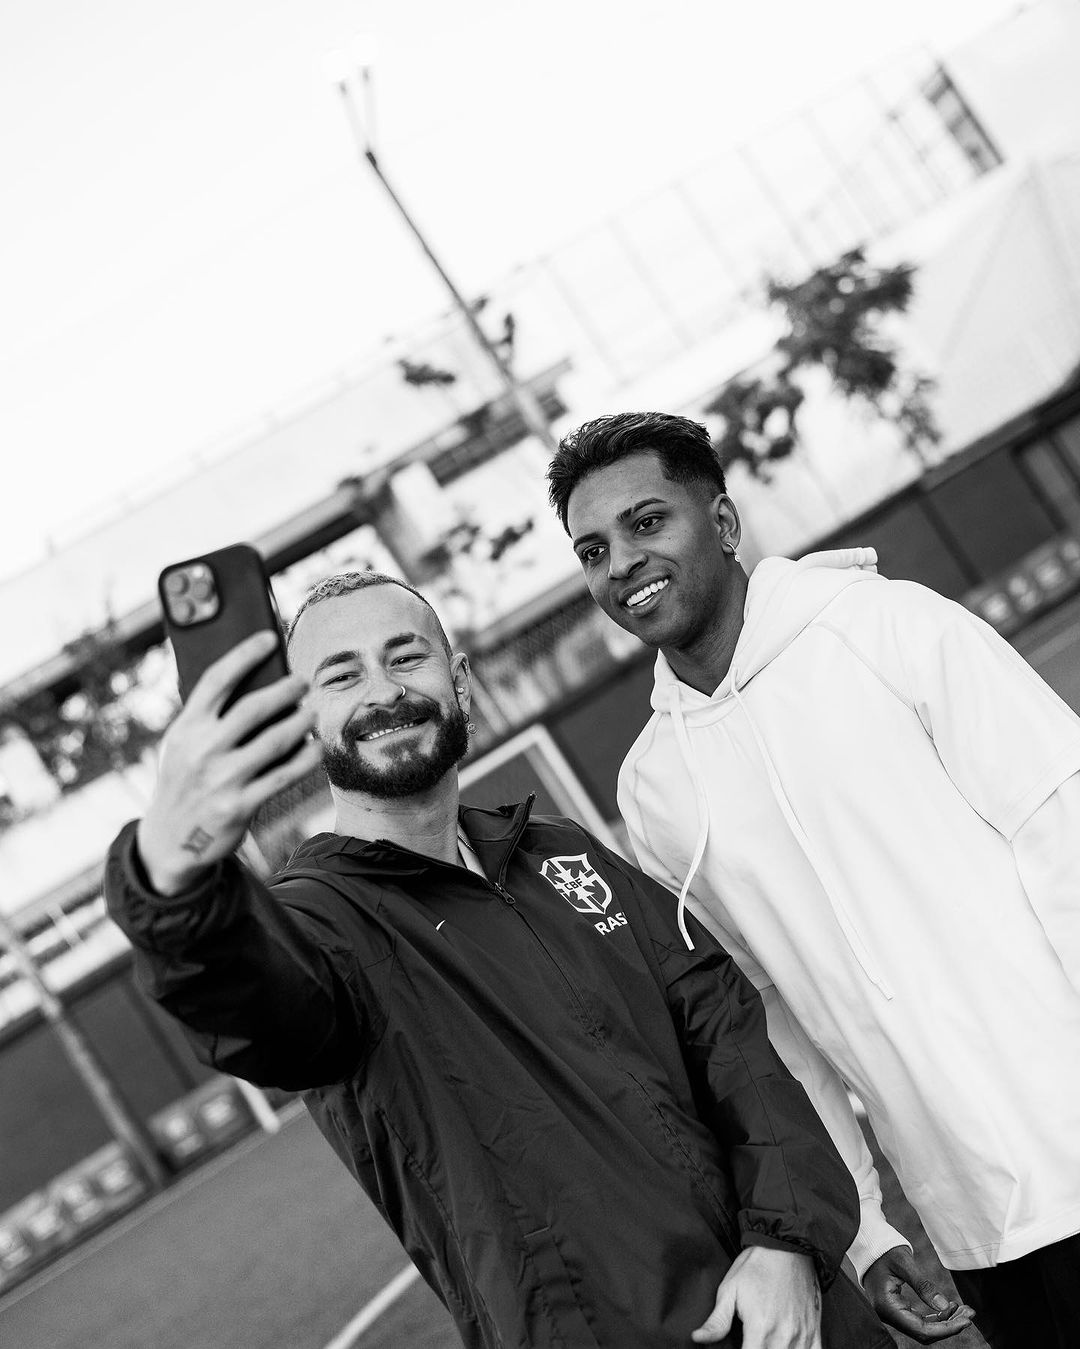 Unexpected exchange: Rodrygo Goes and YouTuber Fred combine the breakthrough between football and digital media